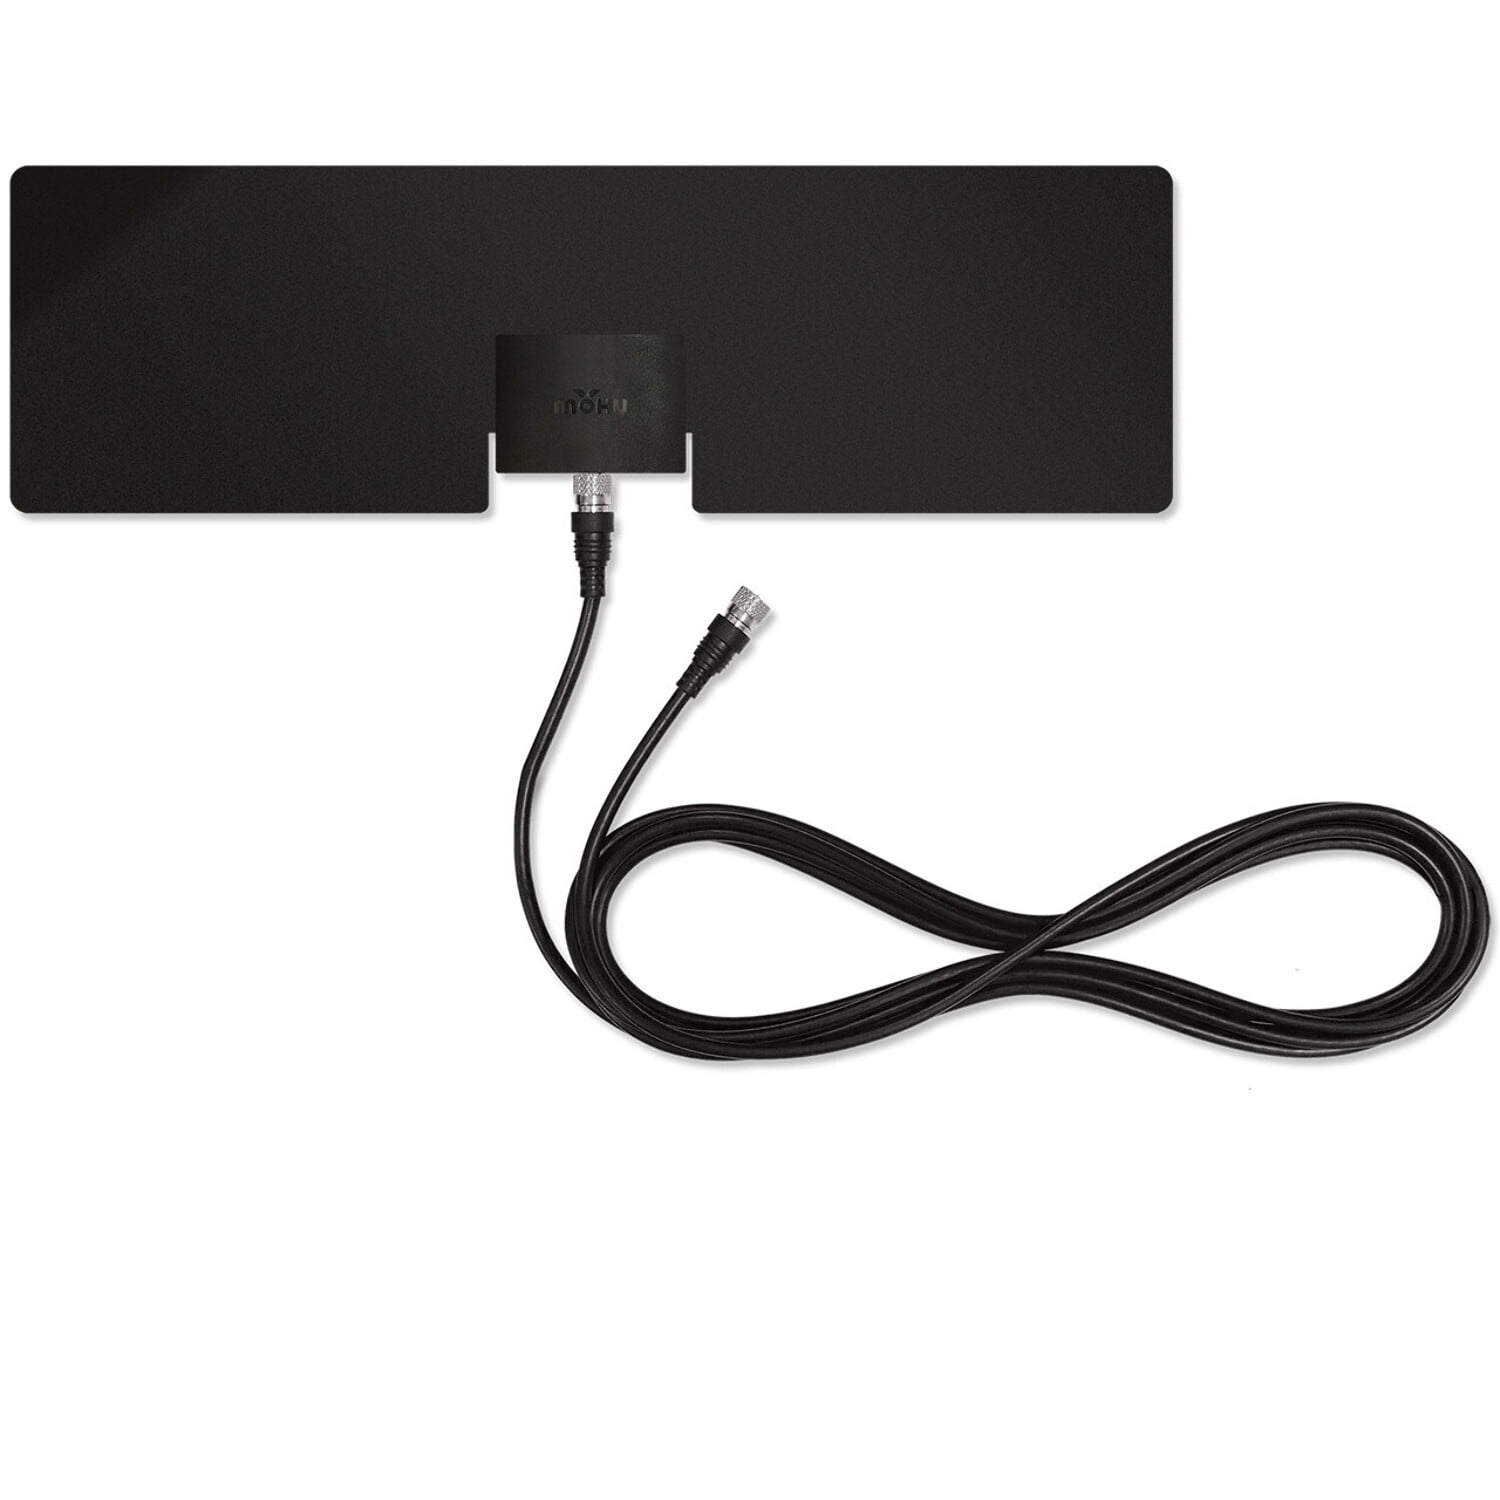 Mohu Indoor Amplified 50-Mile Range HDTV Antenna with 16 ft Cable in White 